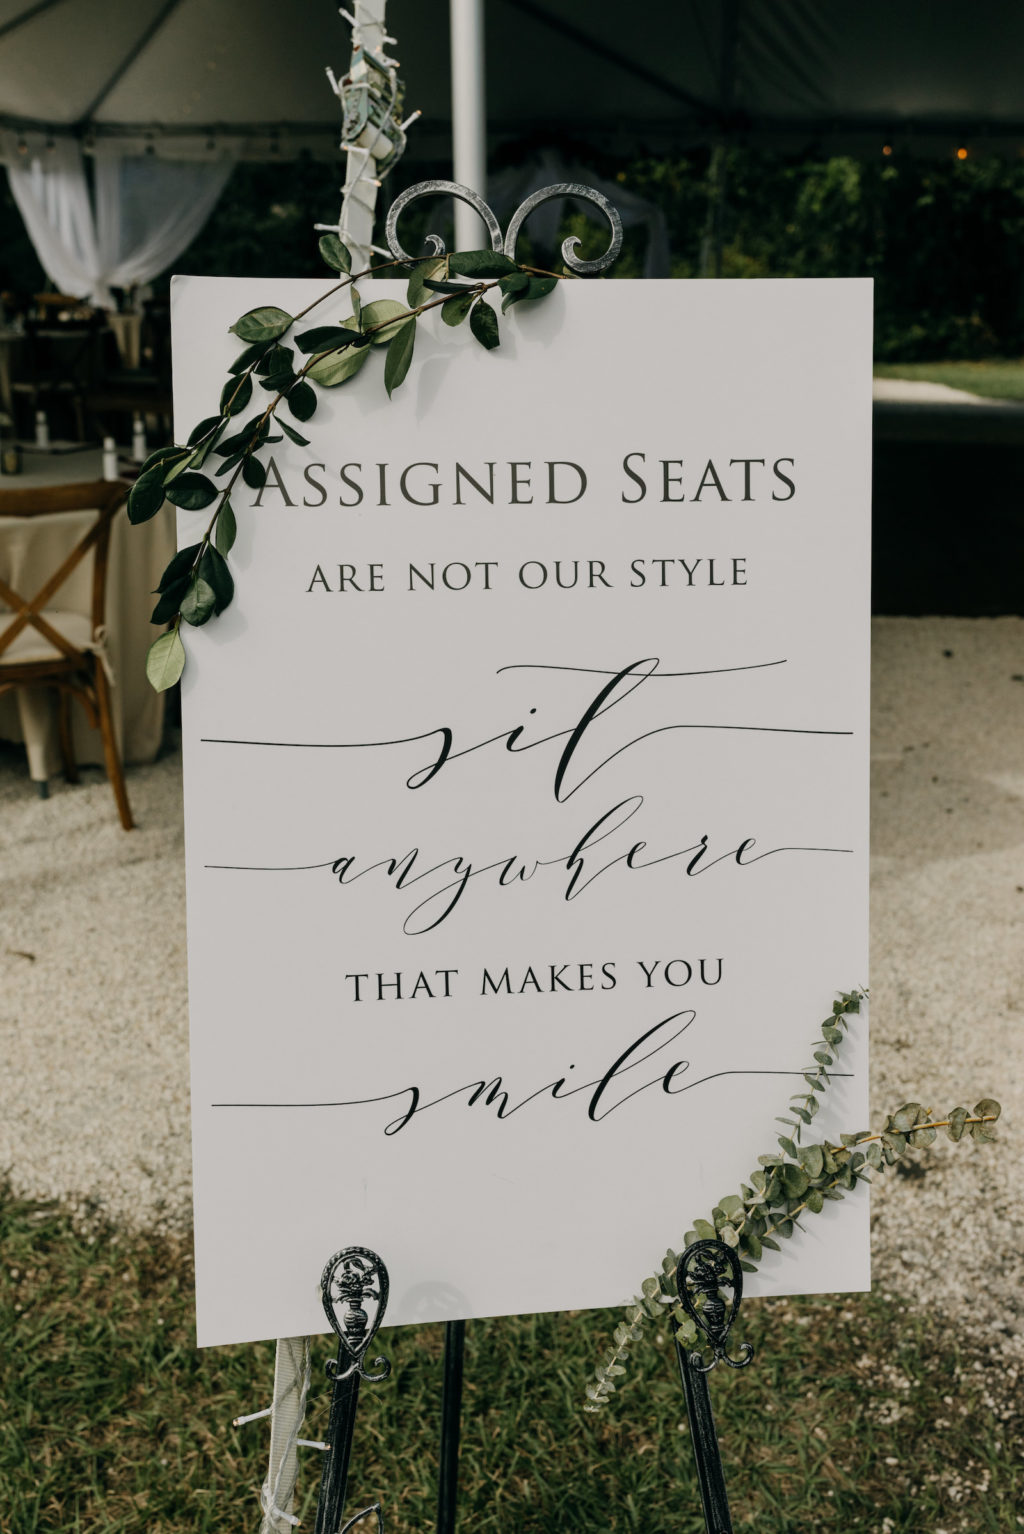 Garden Themed Wedding Reception Decor, White Unique Seating Signage with Greenery Garland | Tampa Bay Wedding Photographer Amber McWhorter Photography